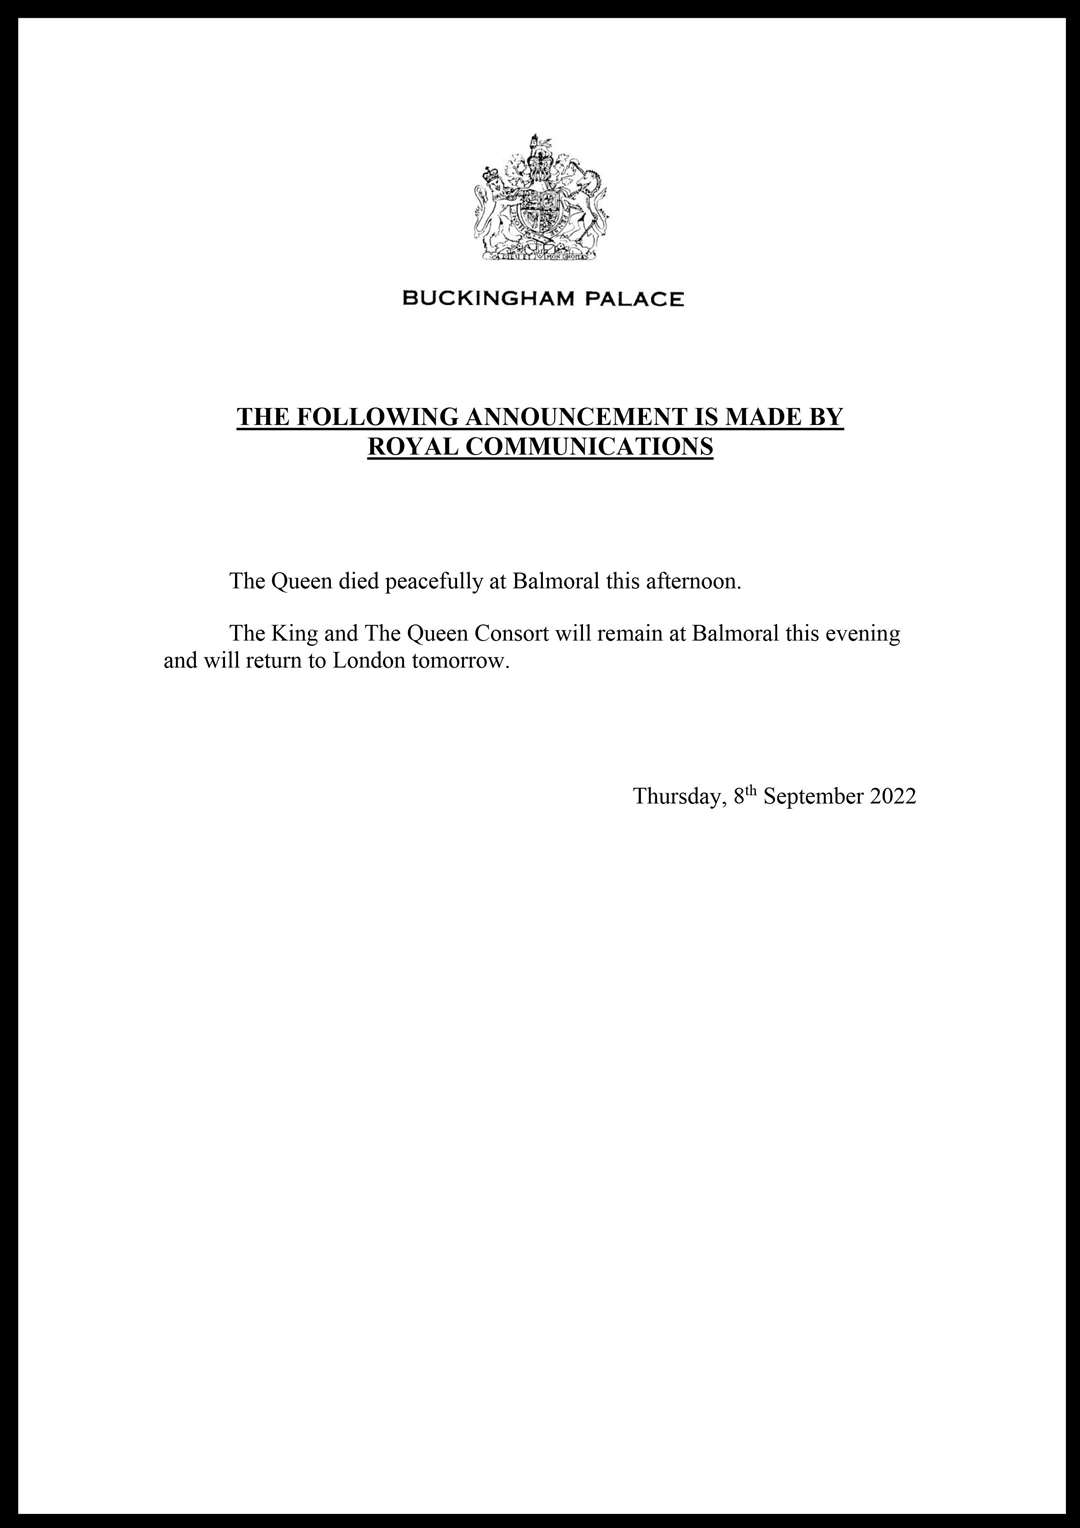 The announcement confirming the death of the Queen (Buckingham Palace/PA)